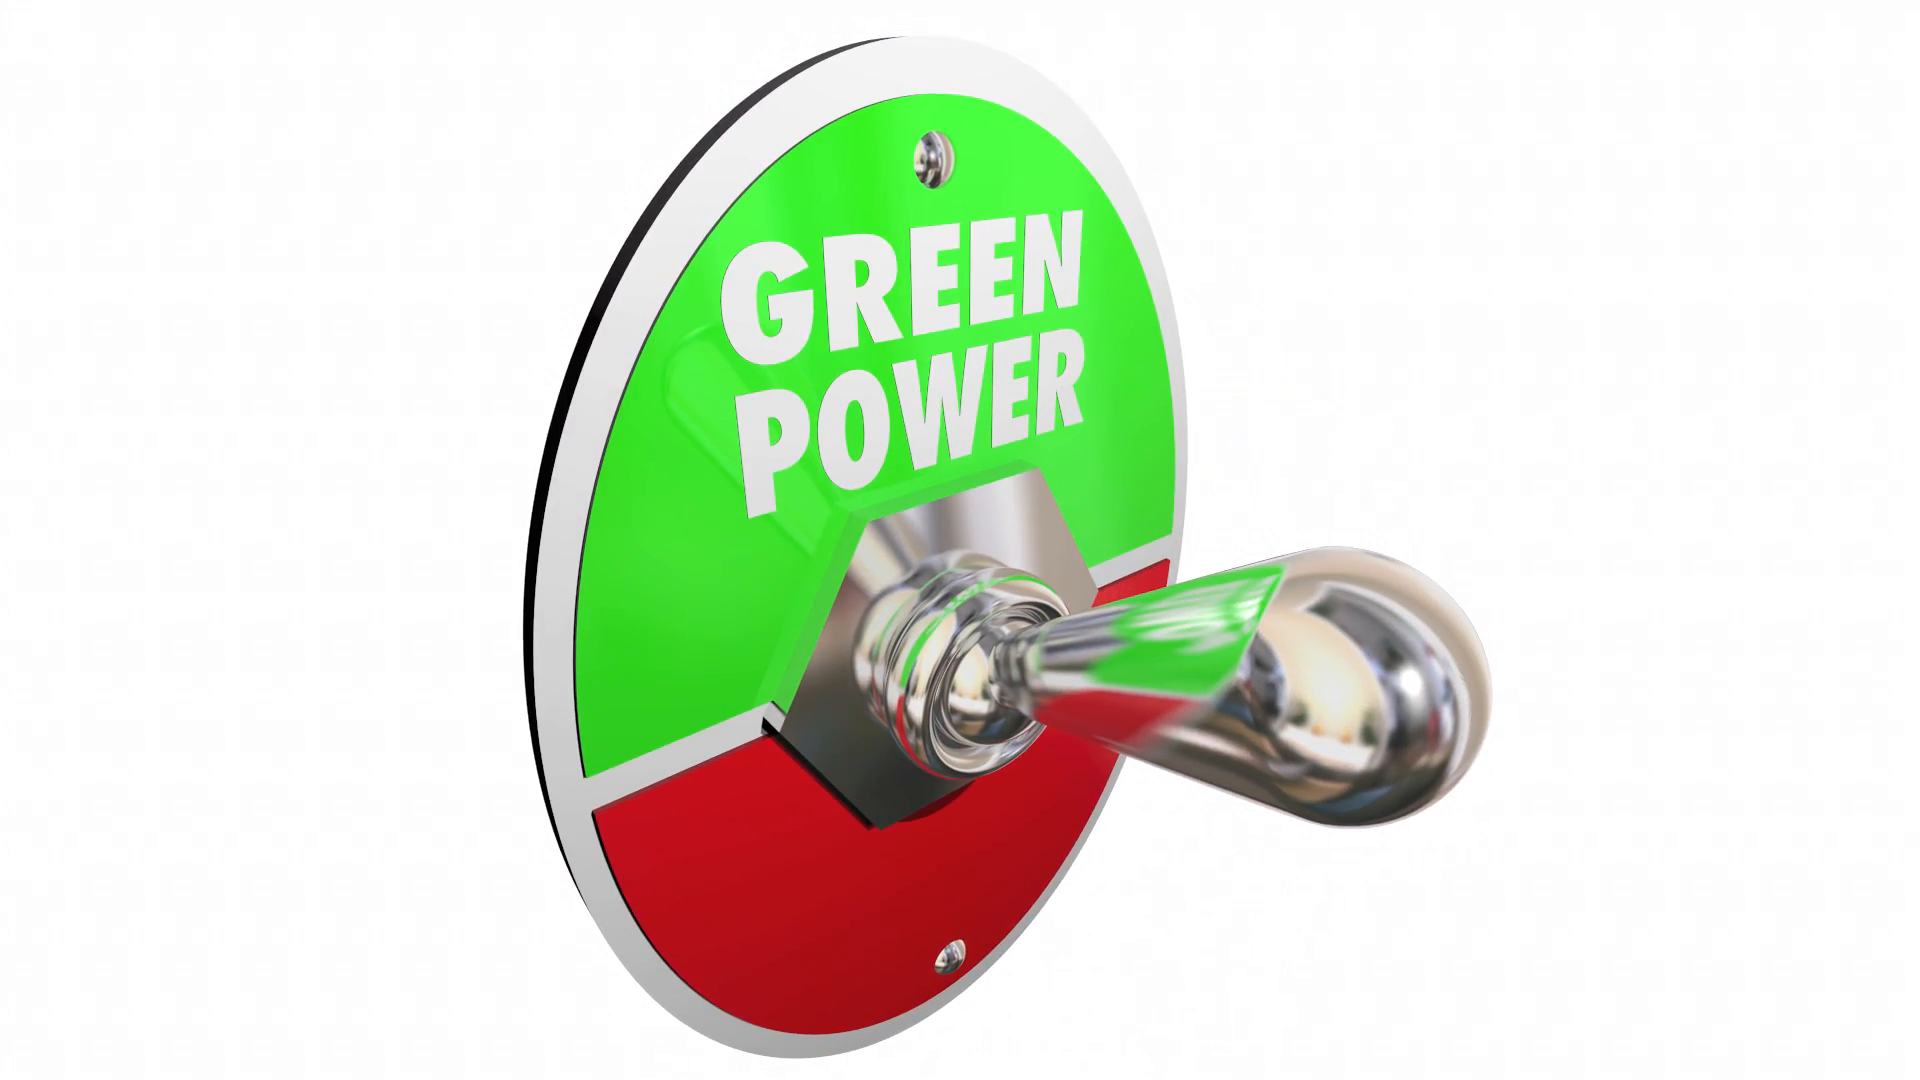 Green Power Renewable Energy Words Light Switch 3d Animation Motion ...